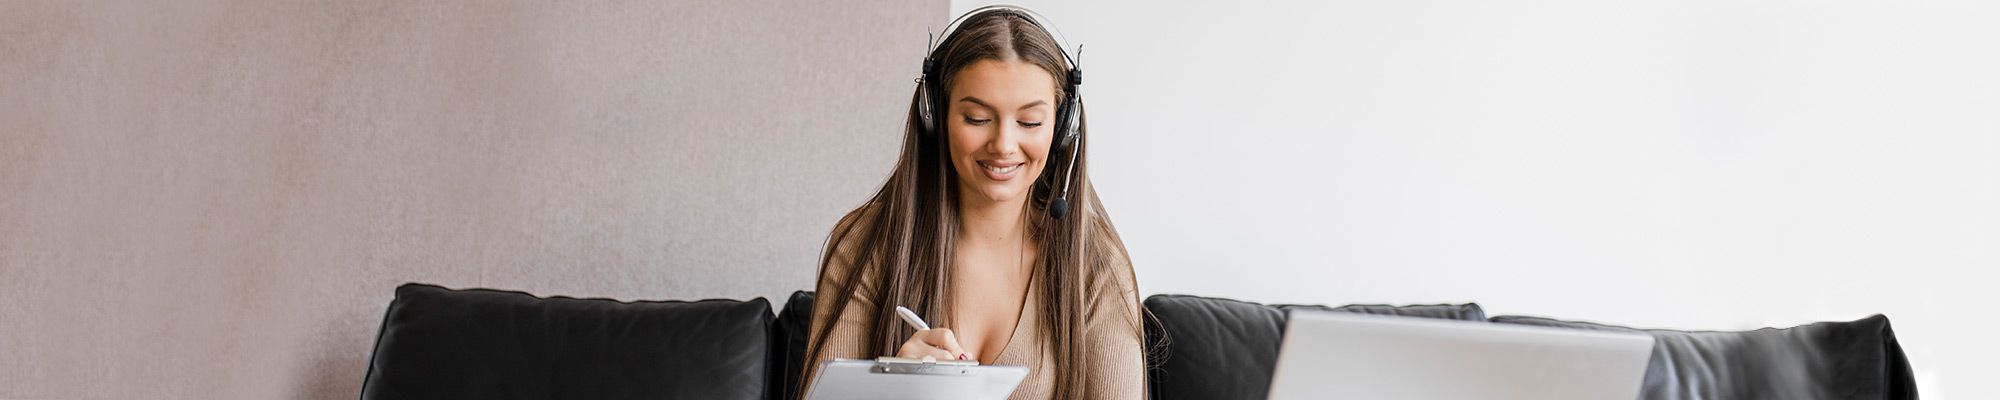 A student virtual learning with headphones on